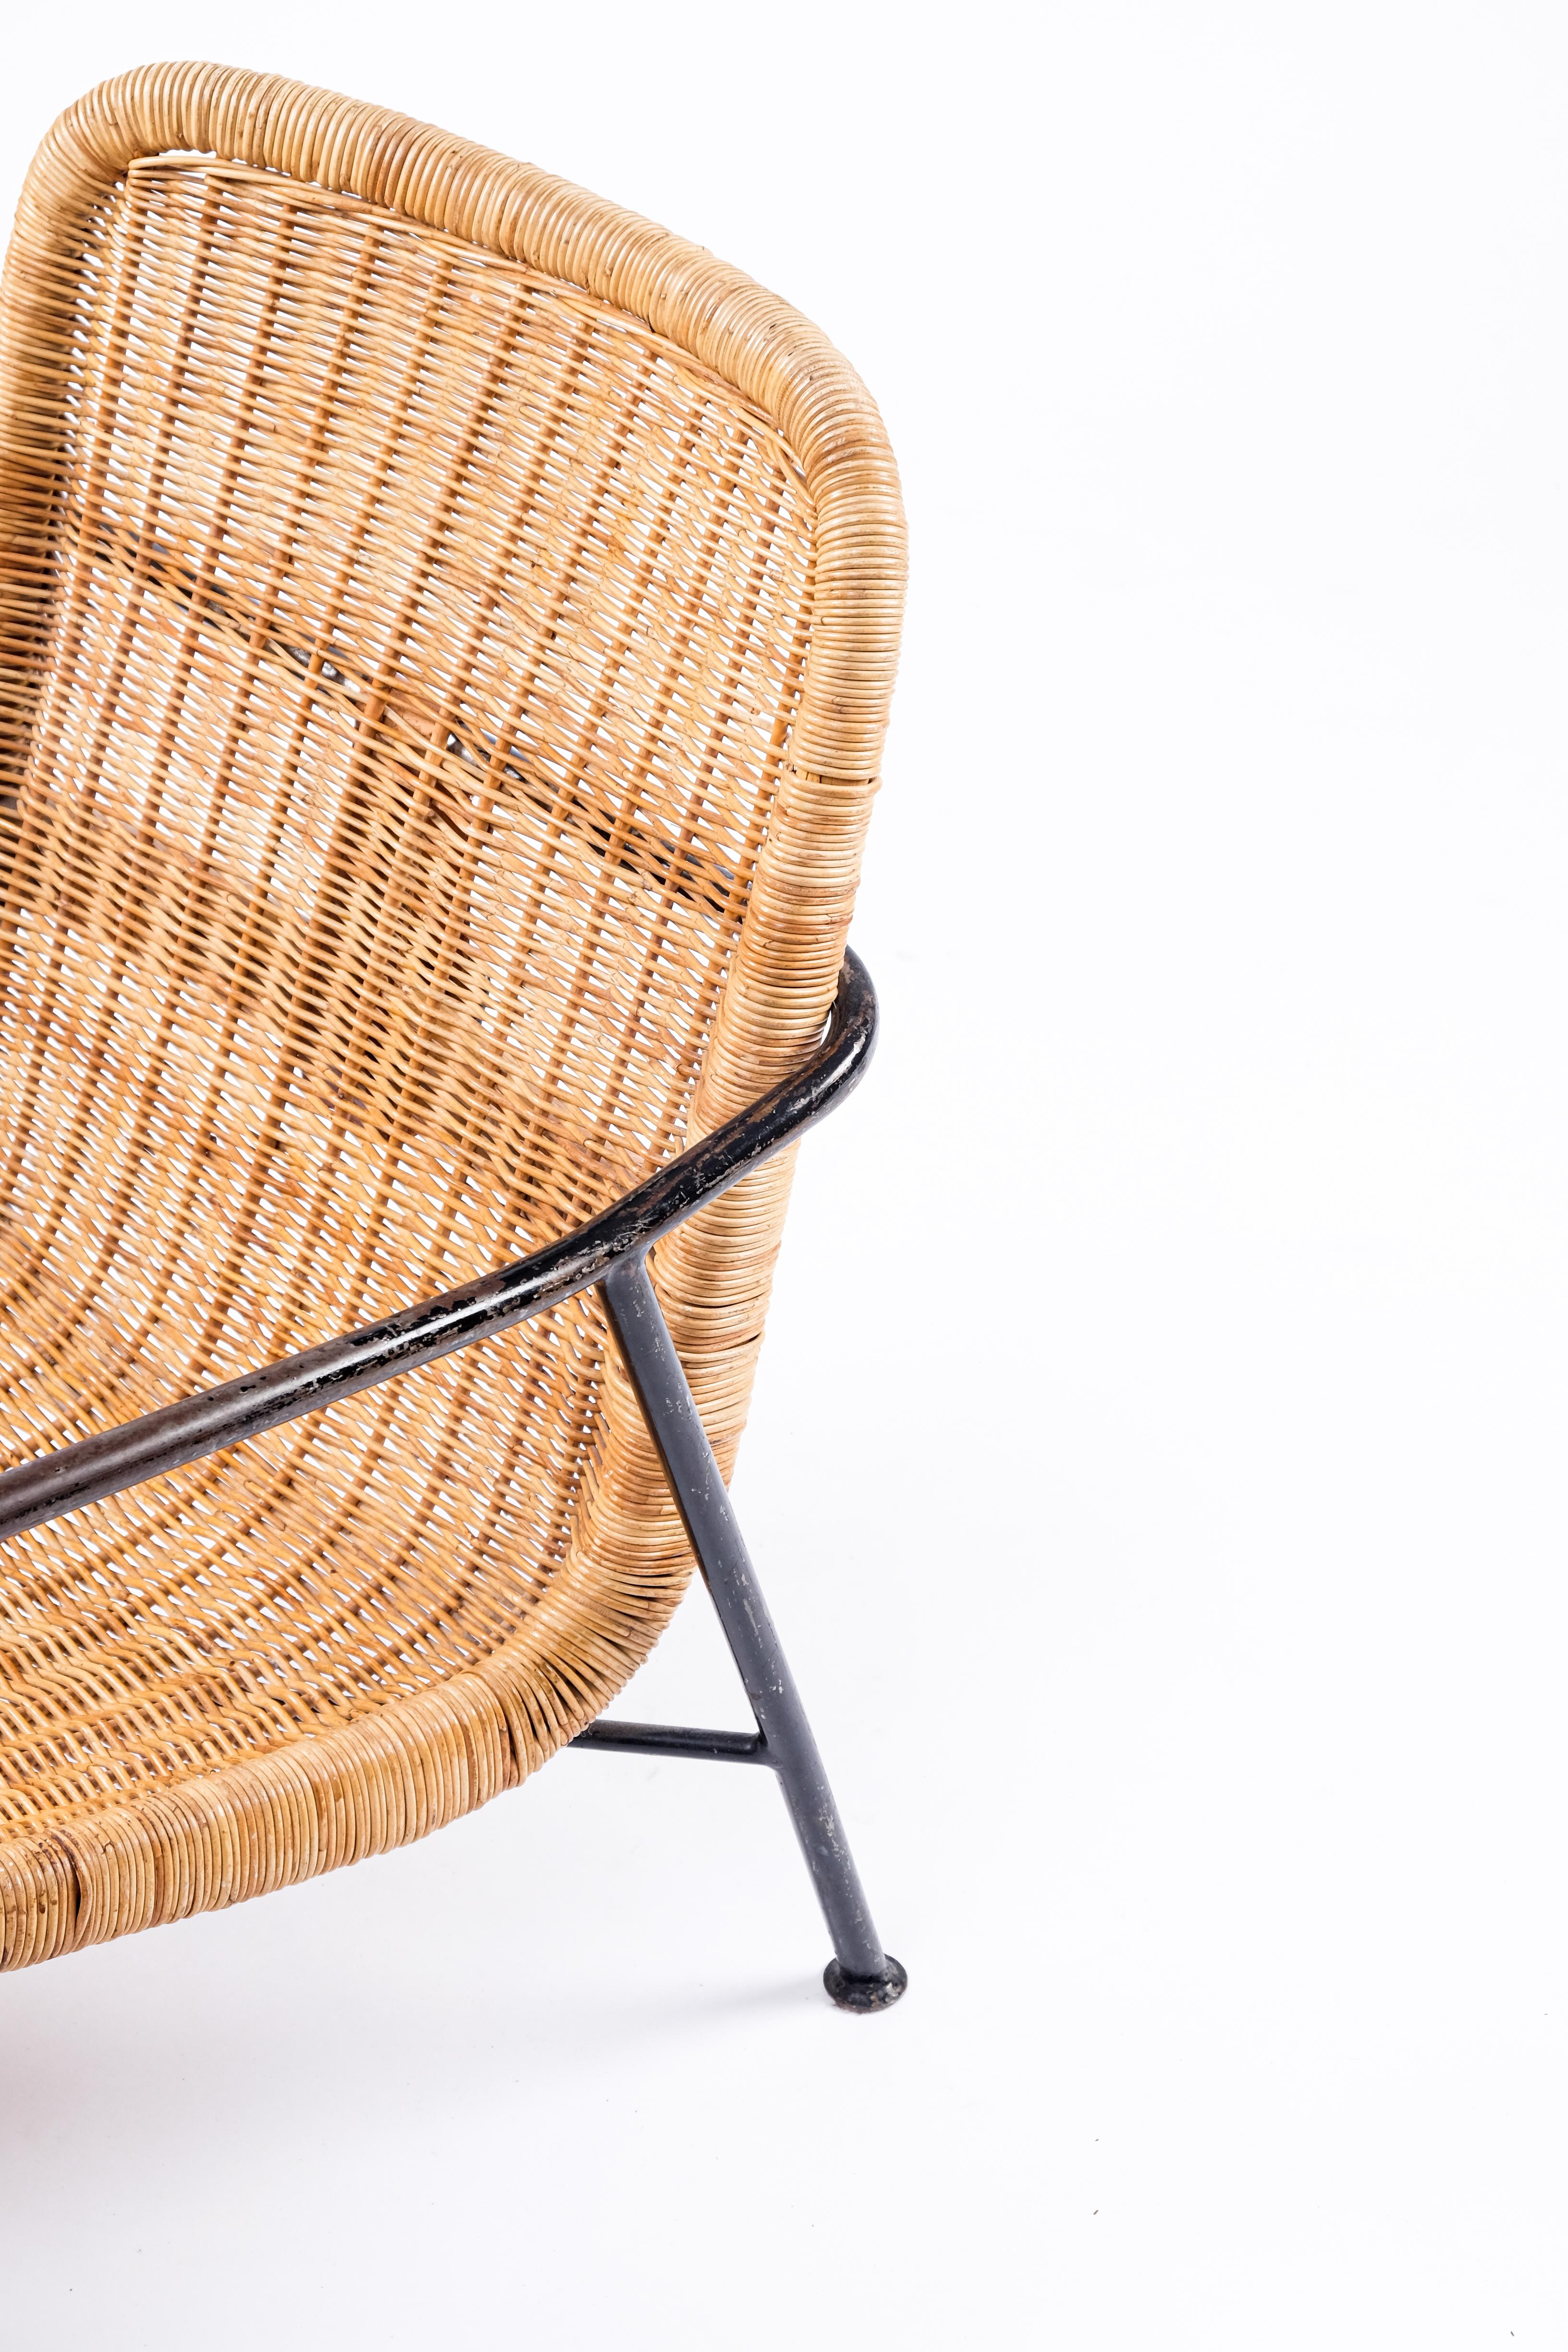 Rare Pair of Swedish Rattan Chairs, 1960s For Sale 2